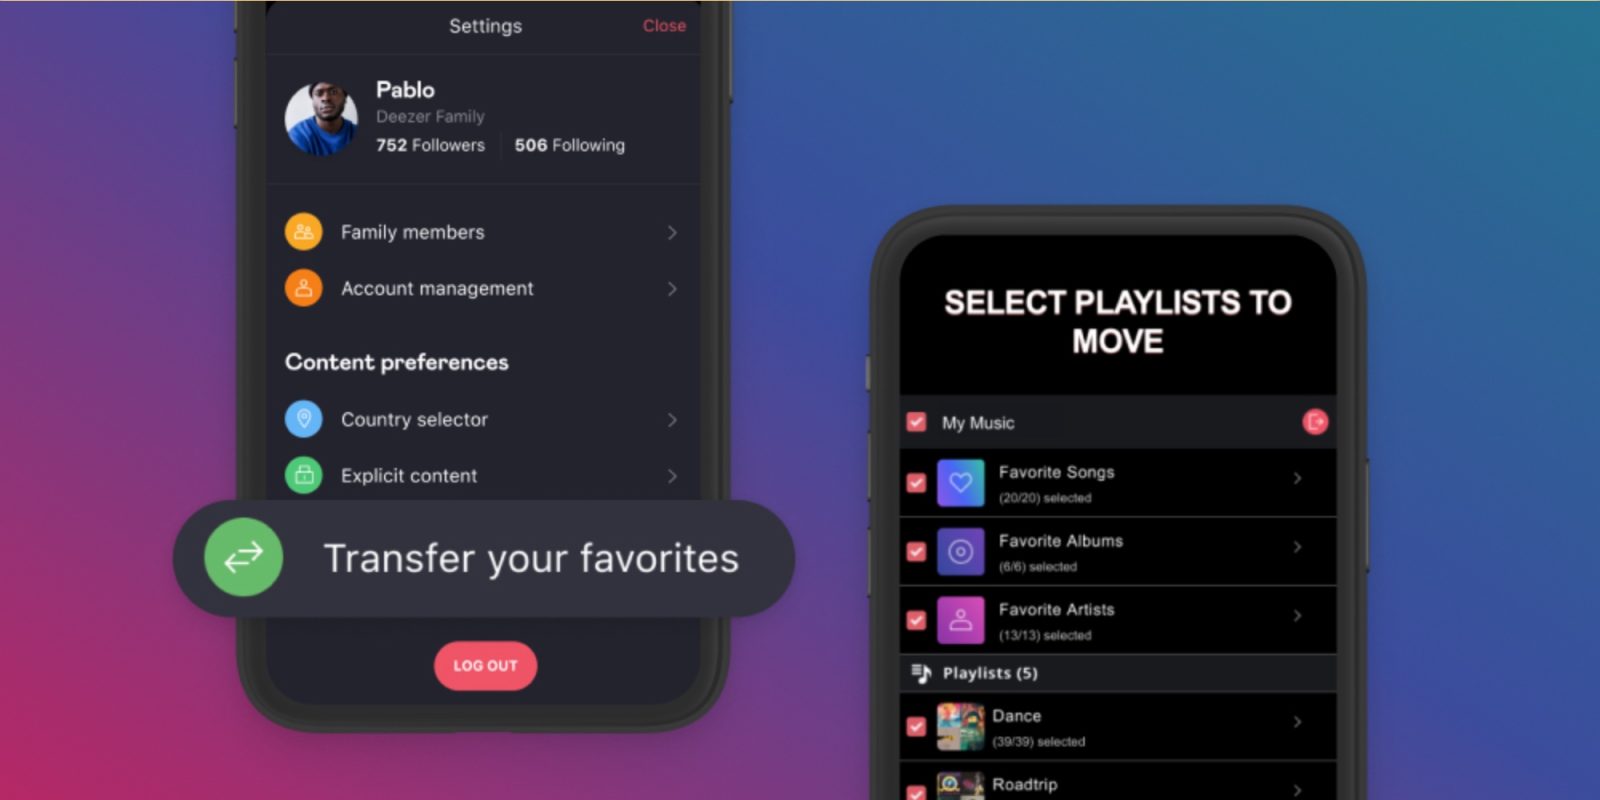 deezer-transfer-your-favorites-feature-9to5mac